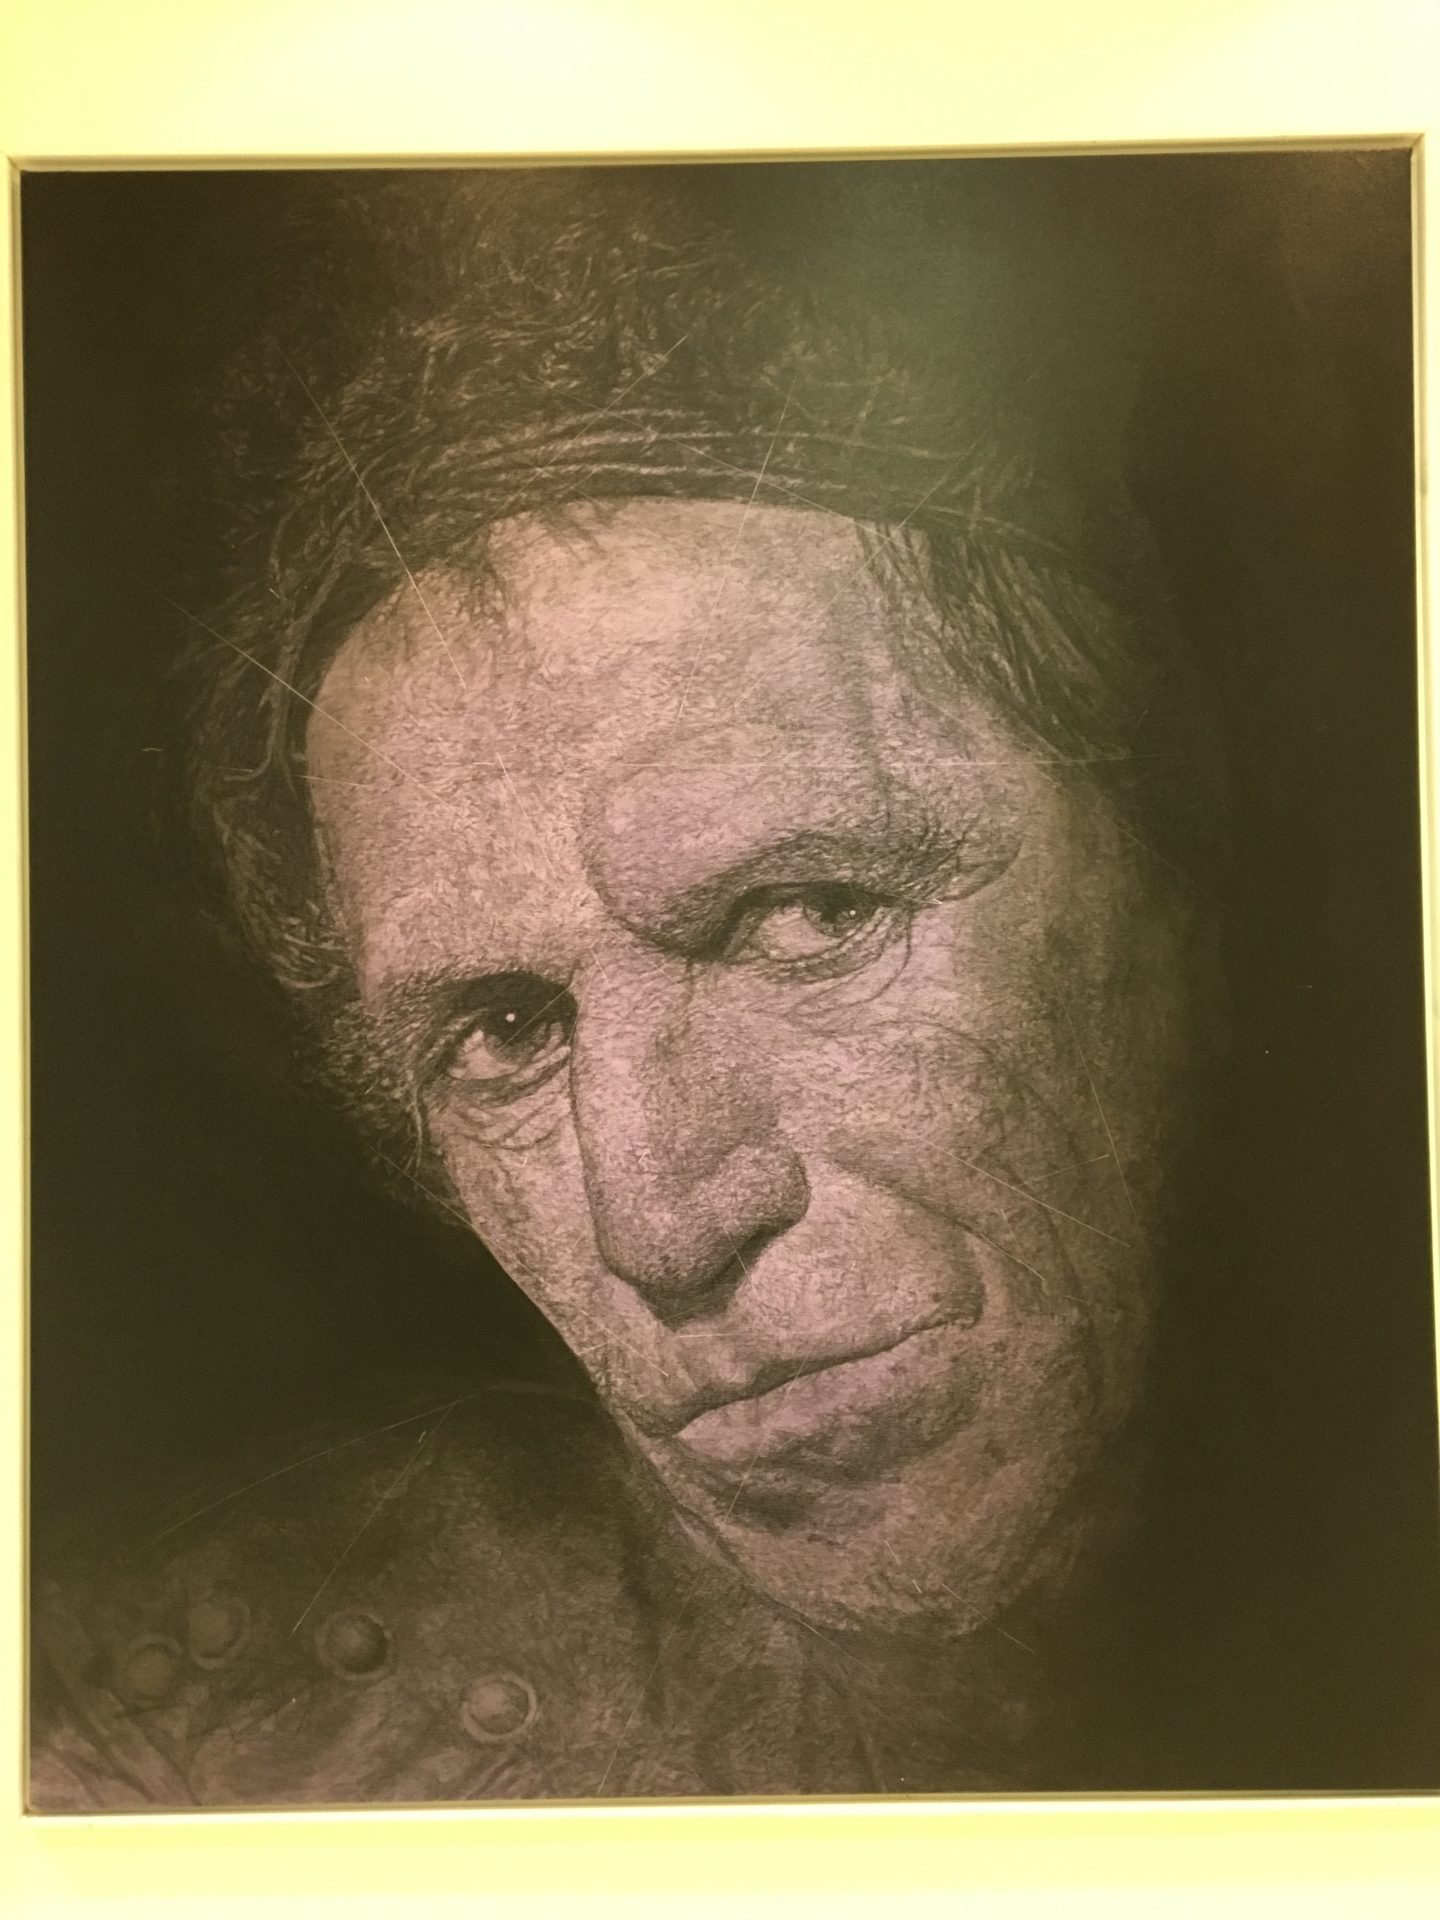 Keith Richards, the Rolling Stones